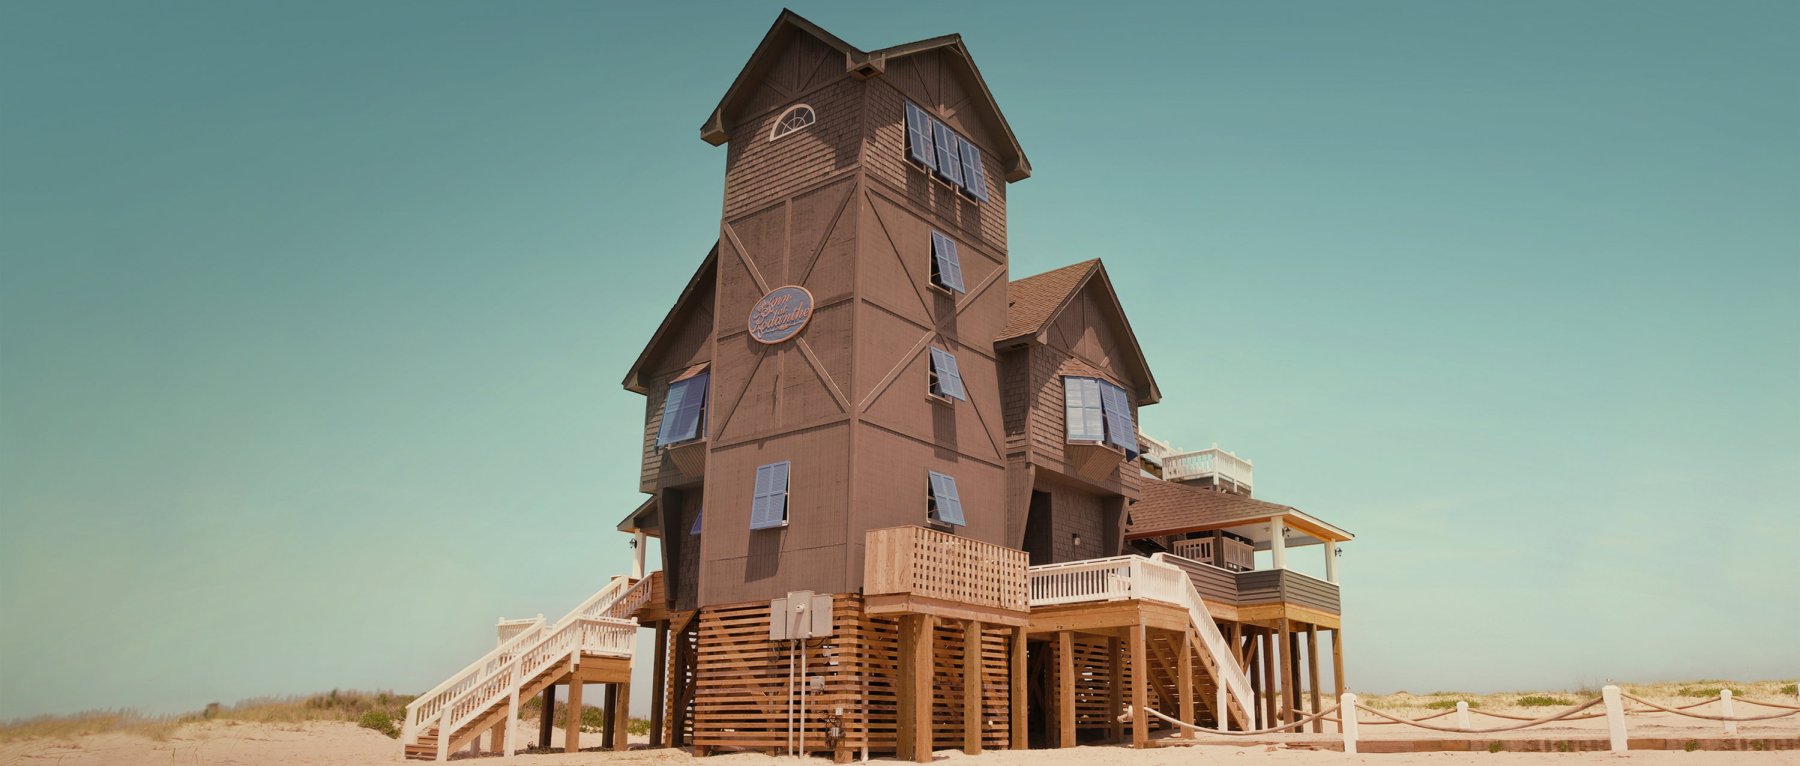 Explore ‘Nights in Rodanthe’ Sights on North Carolina’s Outer Banks